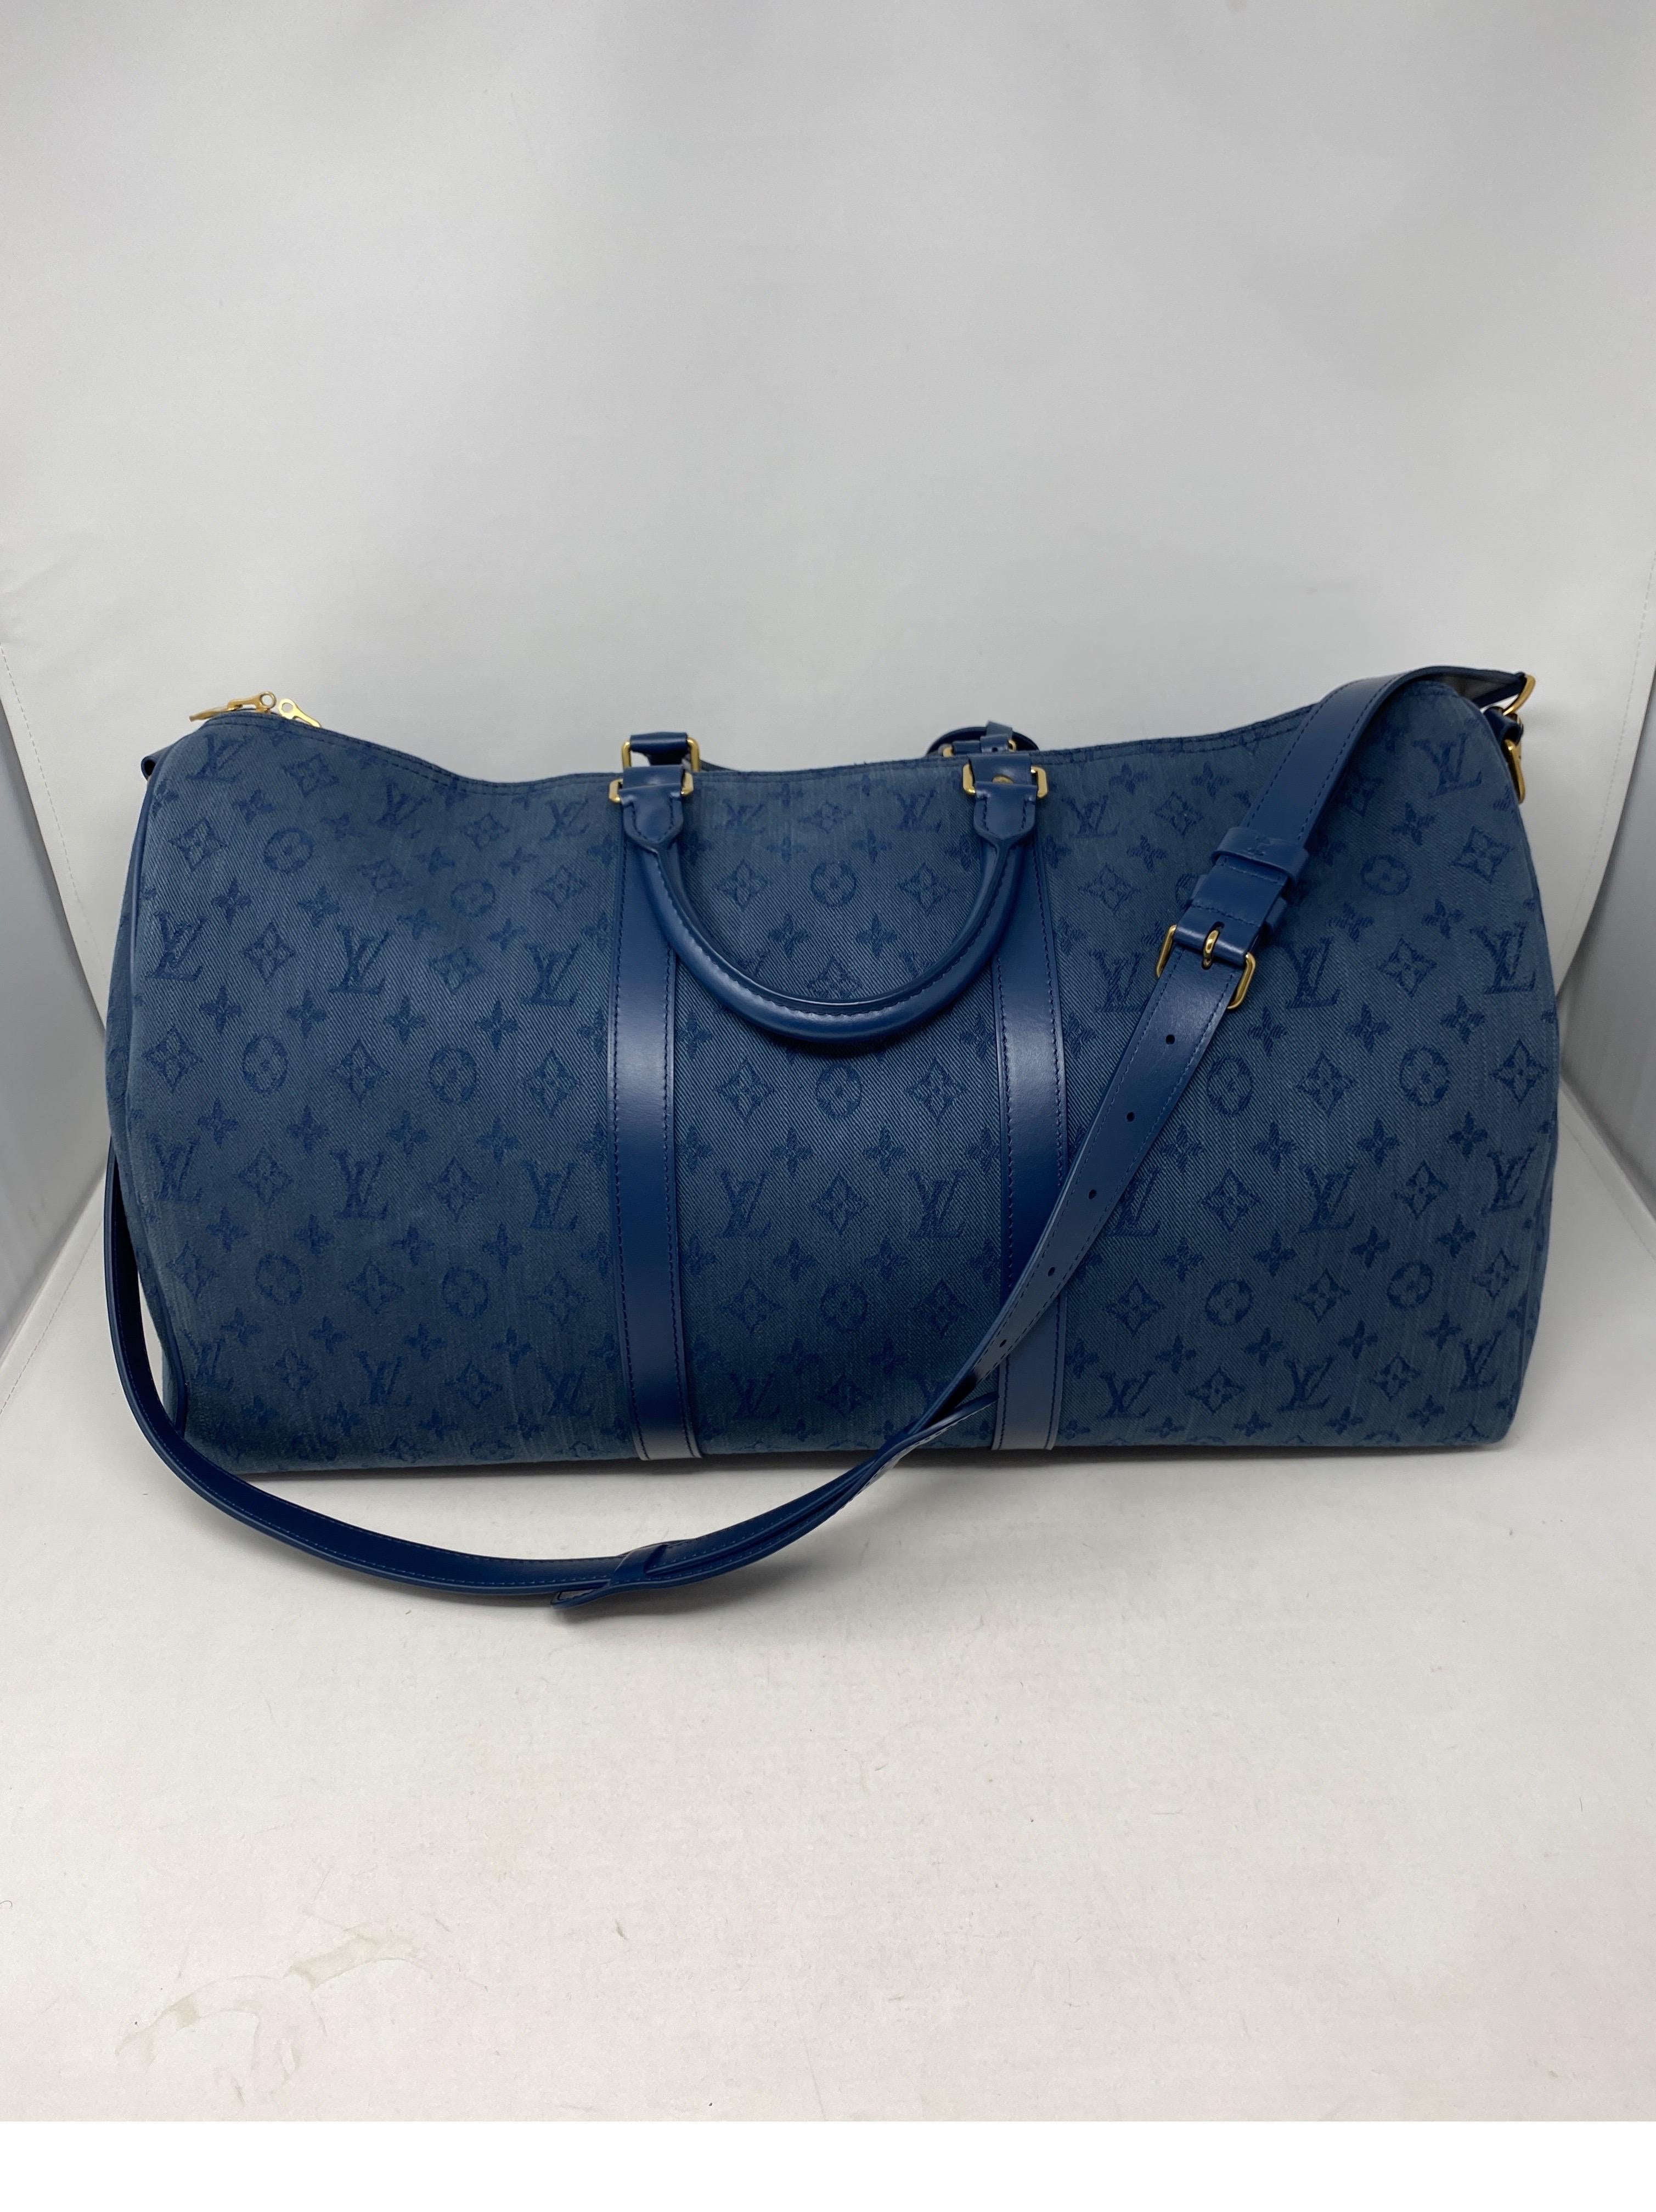 Louis Vuitton Denim 50 Bandouliere. Rare and limited edition. Collector's piece. Brand new condition. Includes strap, luggage tag, lock and keys. Guaranteed authentic. 